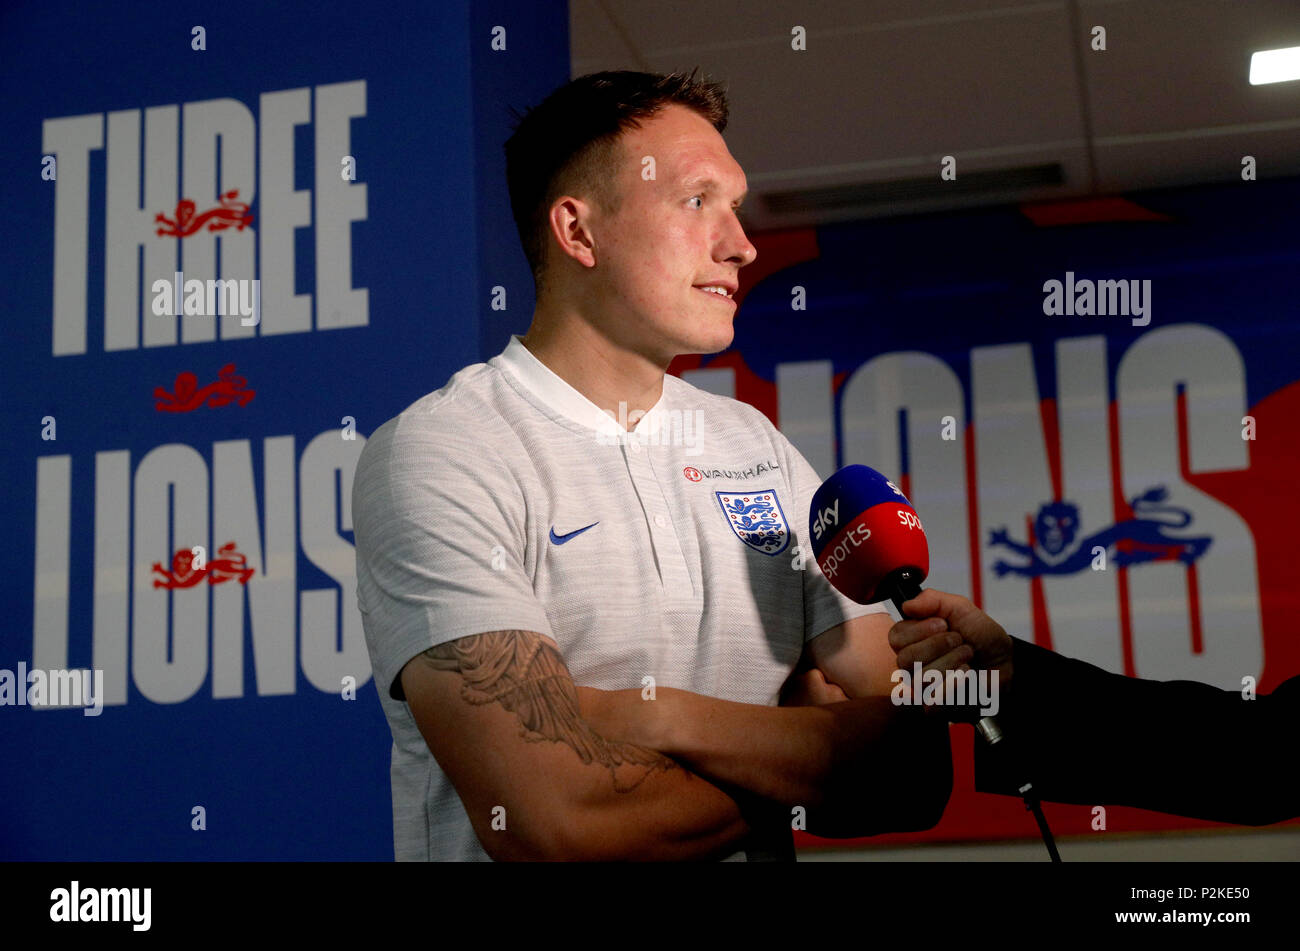 England's Phil Jones during the press conference at Repino Cronwell Park, Repino. PRESS ASSOCIATION Photo. Picture date: Friday June 15, 2018. See PA story WORLDCUP England. Photo credit should read: Owen Humphreys/PA Wire. RESTRICTIONS: Editorial use only. No commercial use. No use with any unofficial 3rd party logos. No manipulation of images. No video emulation. Stock Photo